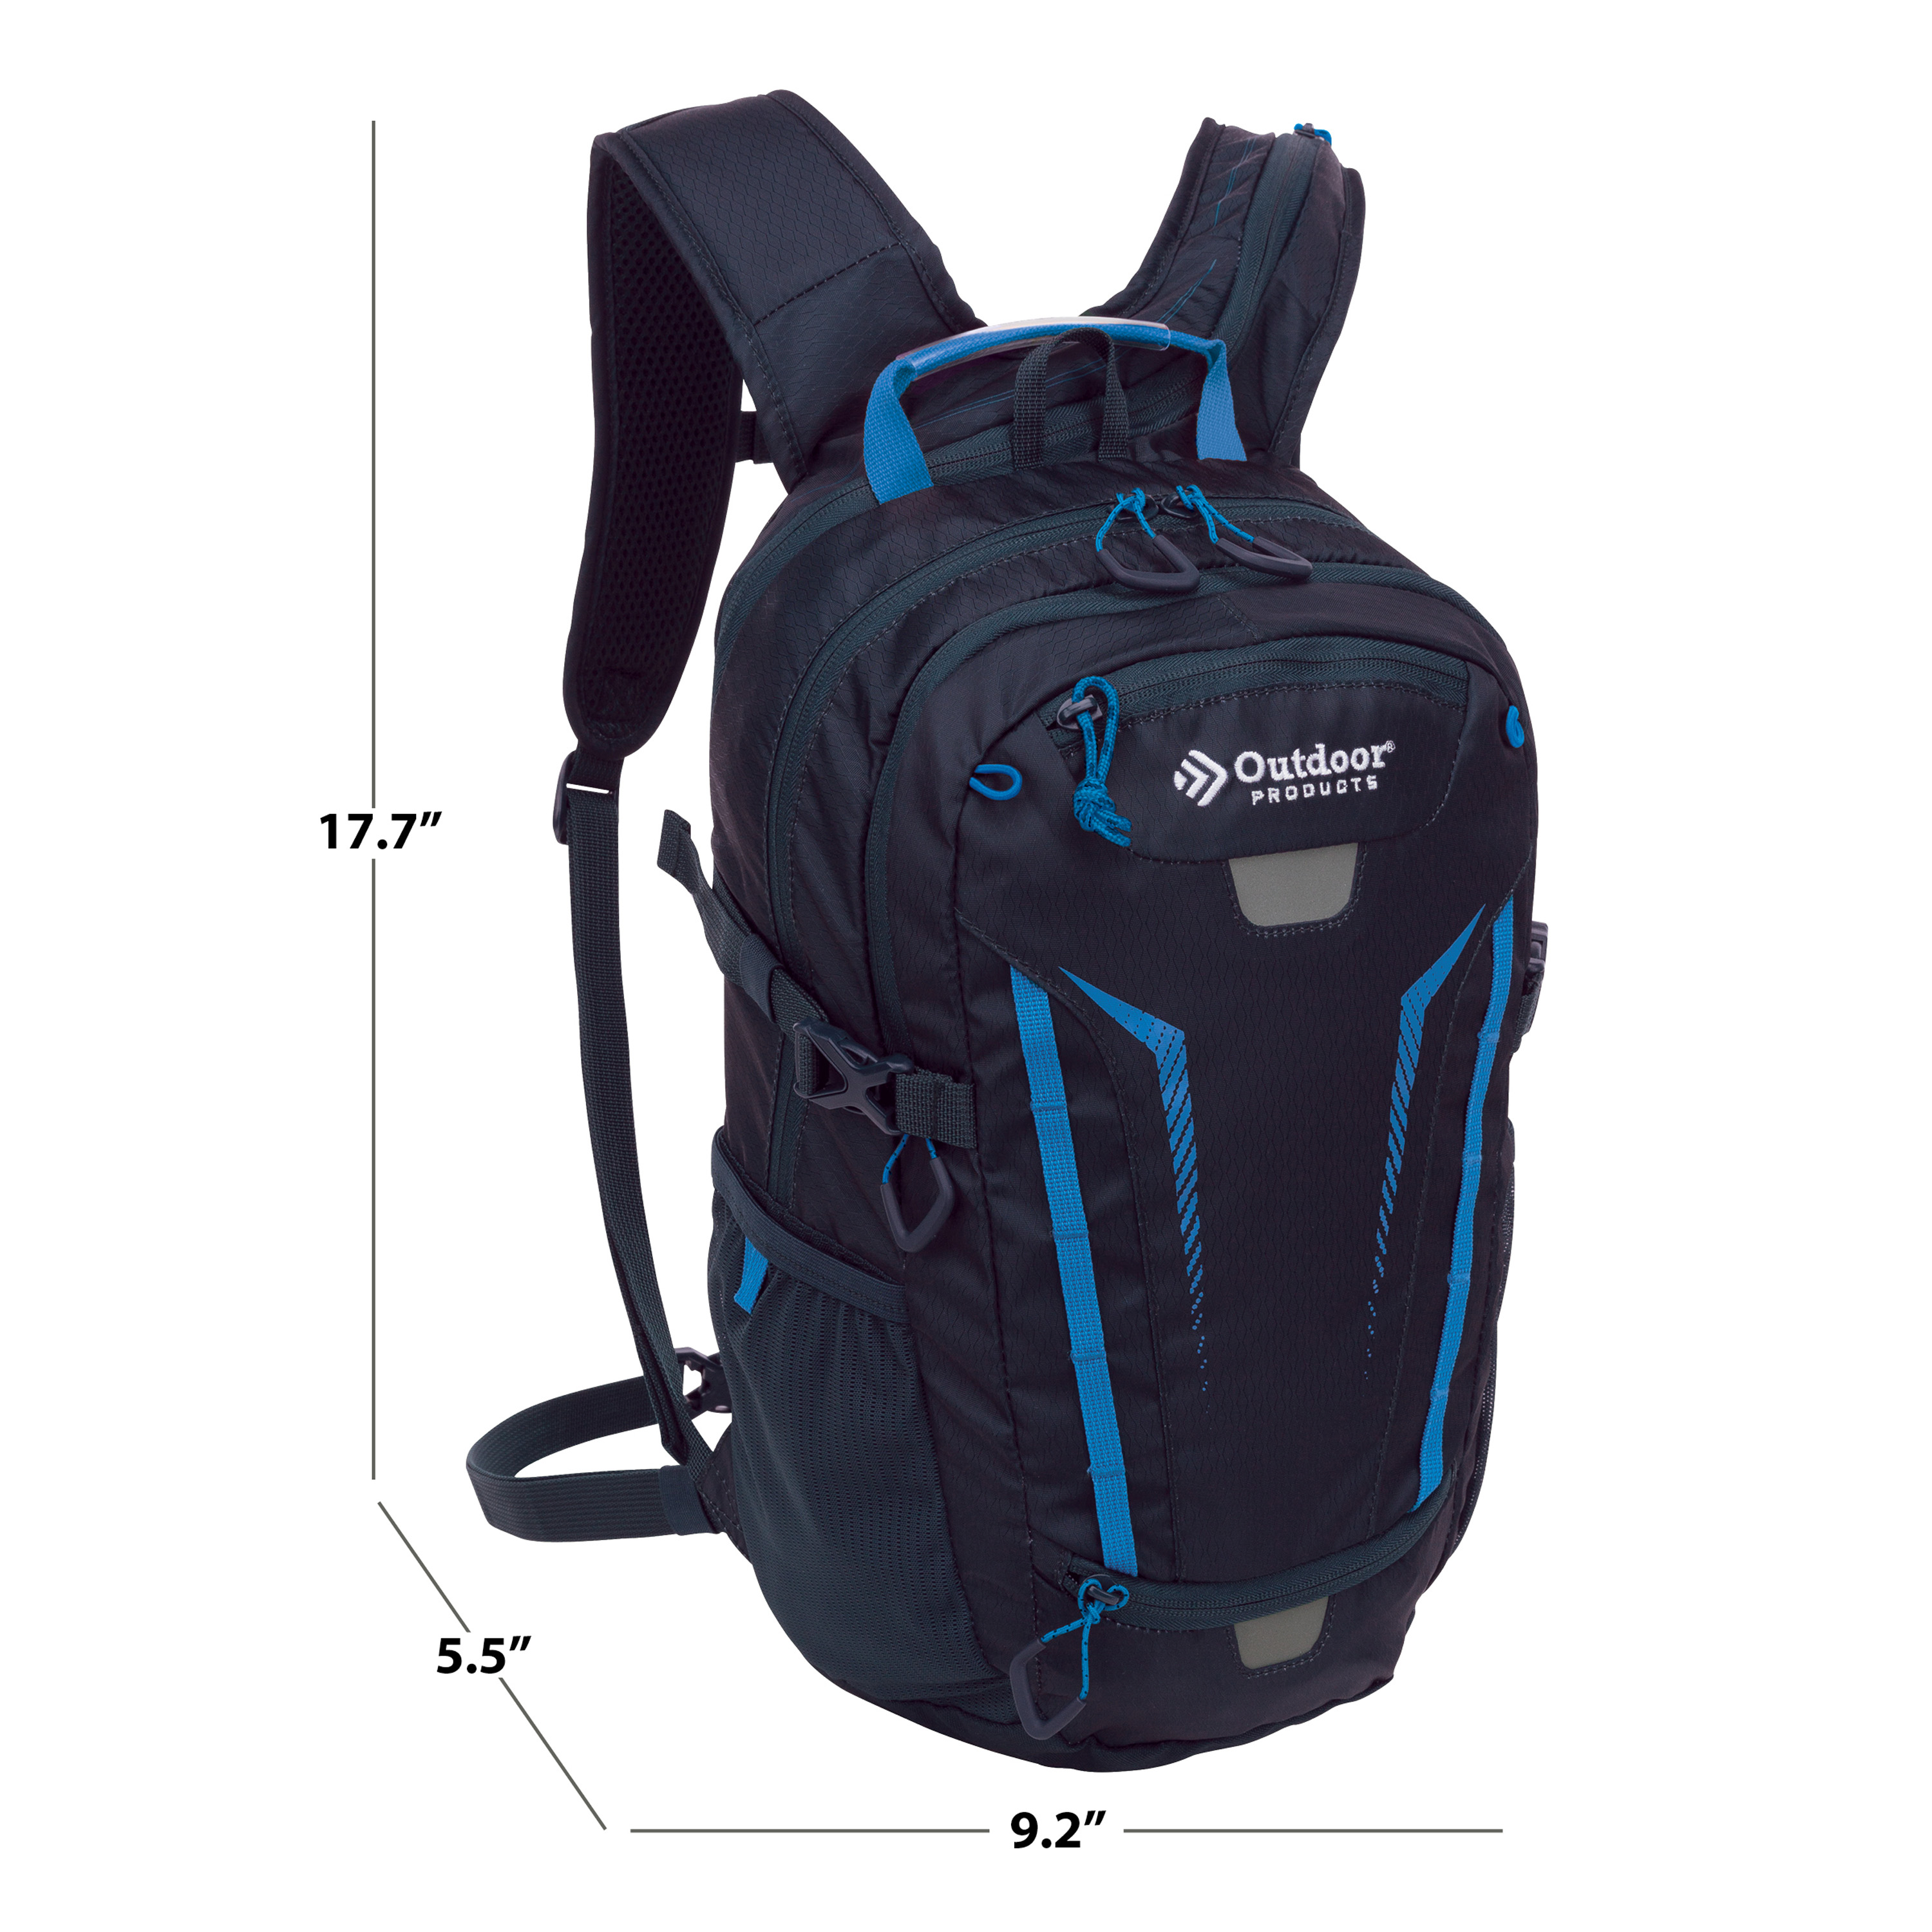 Outdoor Products Deluxe 17 Ltr Hydration Backpack, with 2-Liter Reservoir, Blue, Unisex - image 5 of 12